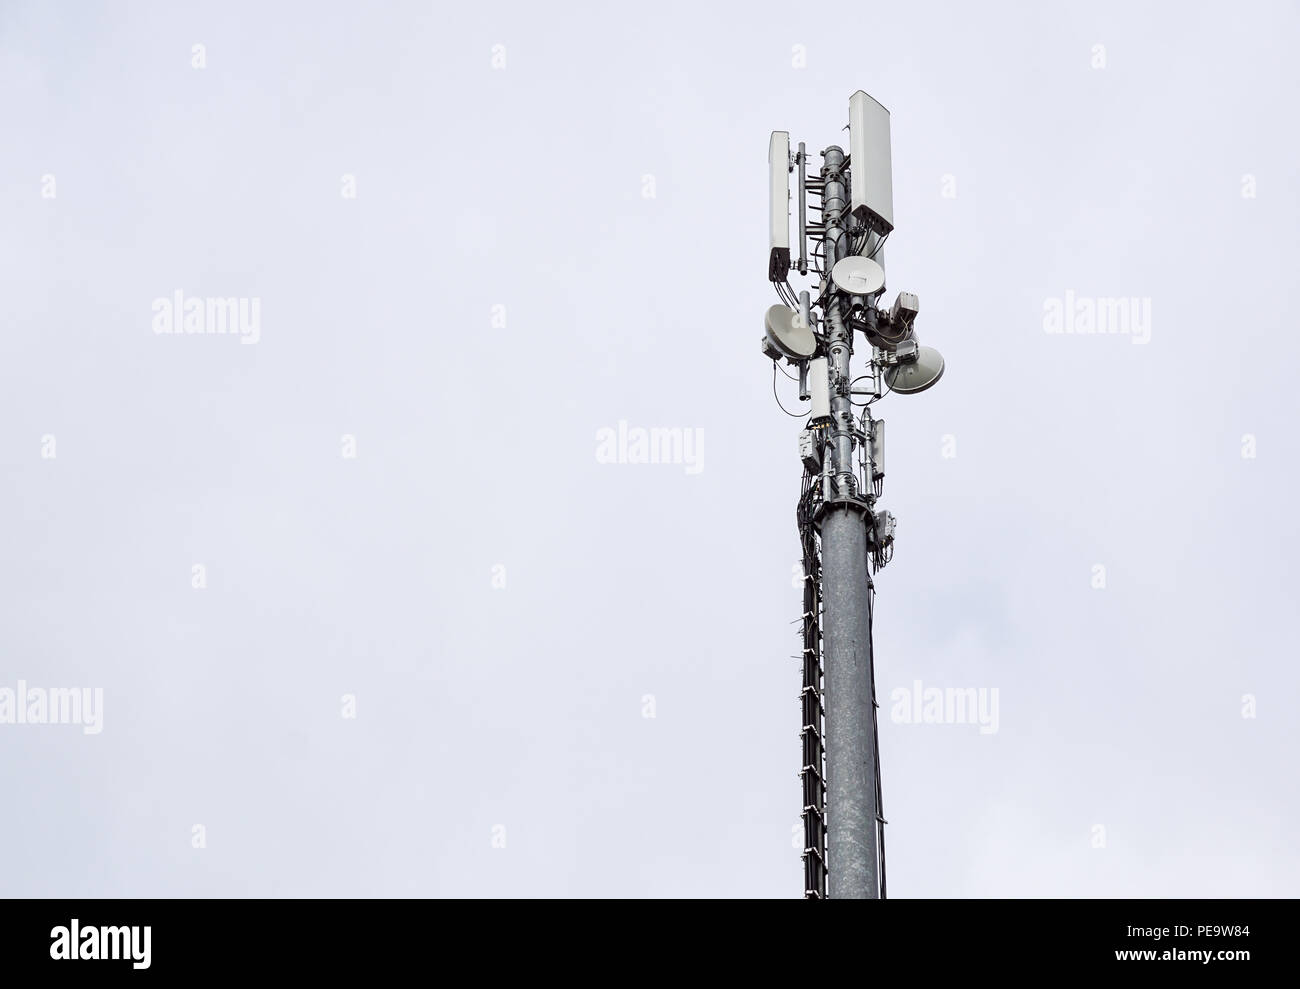 Technology on the top of the telecommunication GSM. Masts for mobile phone signal. Tower with antennas of cellular communication . Stock Photo